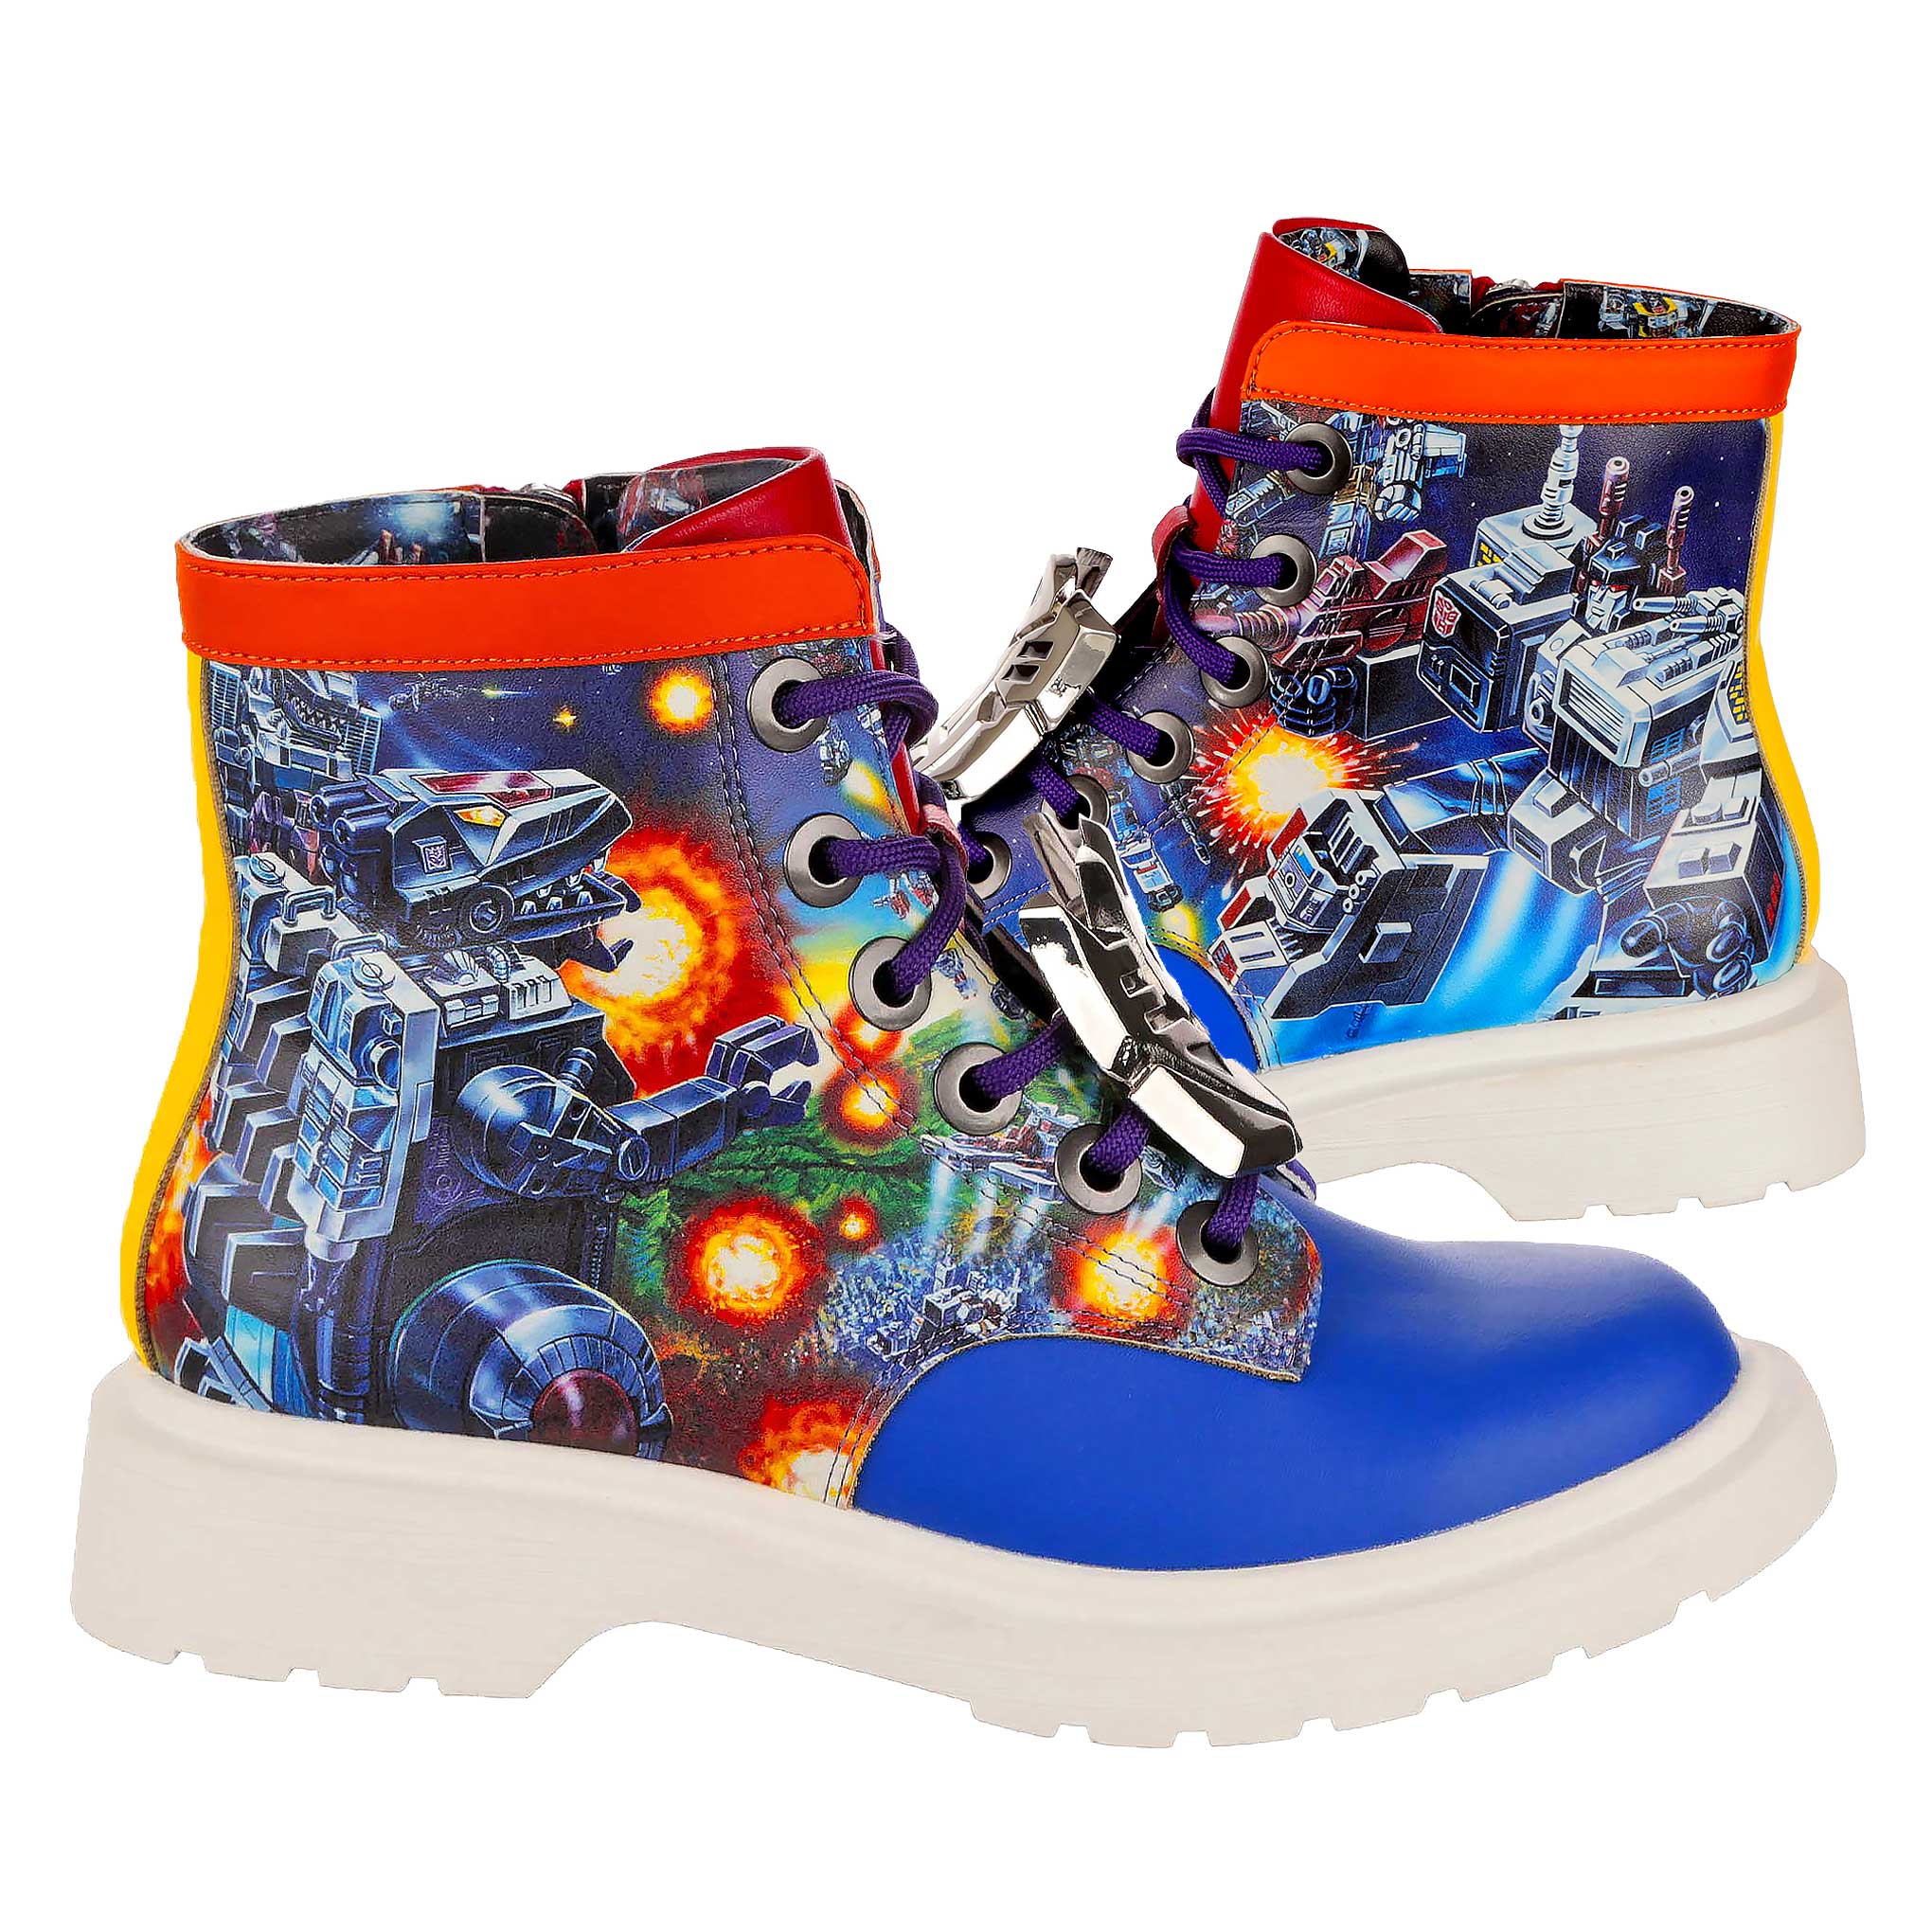 A pair of lace-up ankle boots with a vintage Transformers scene showing Trypticon battling Metroplex on either side of the boot. A cobalt blue toe contrasts with the blue, orange and green Transformers print on the main body of the shoe. An orange edging runs along the top of the boot whilst a white chunky sole finishes the lace-up boots. Purple laces thread through the boot with silver metallic lace charms sitting on the laces. 